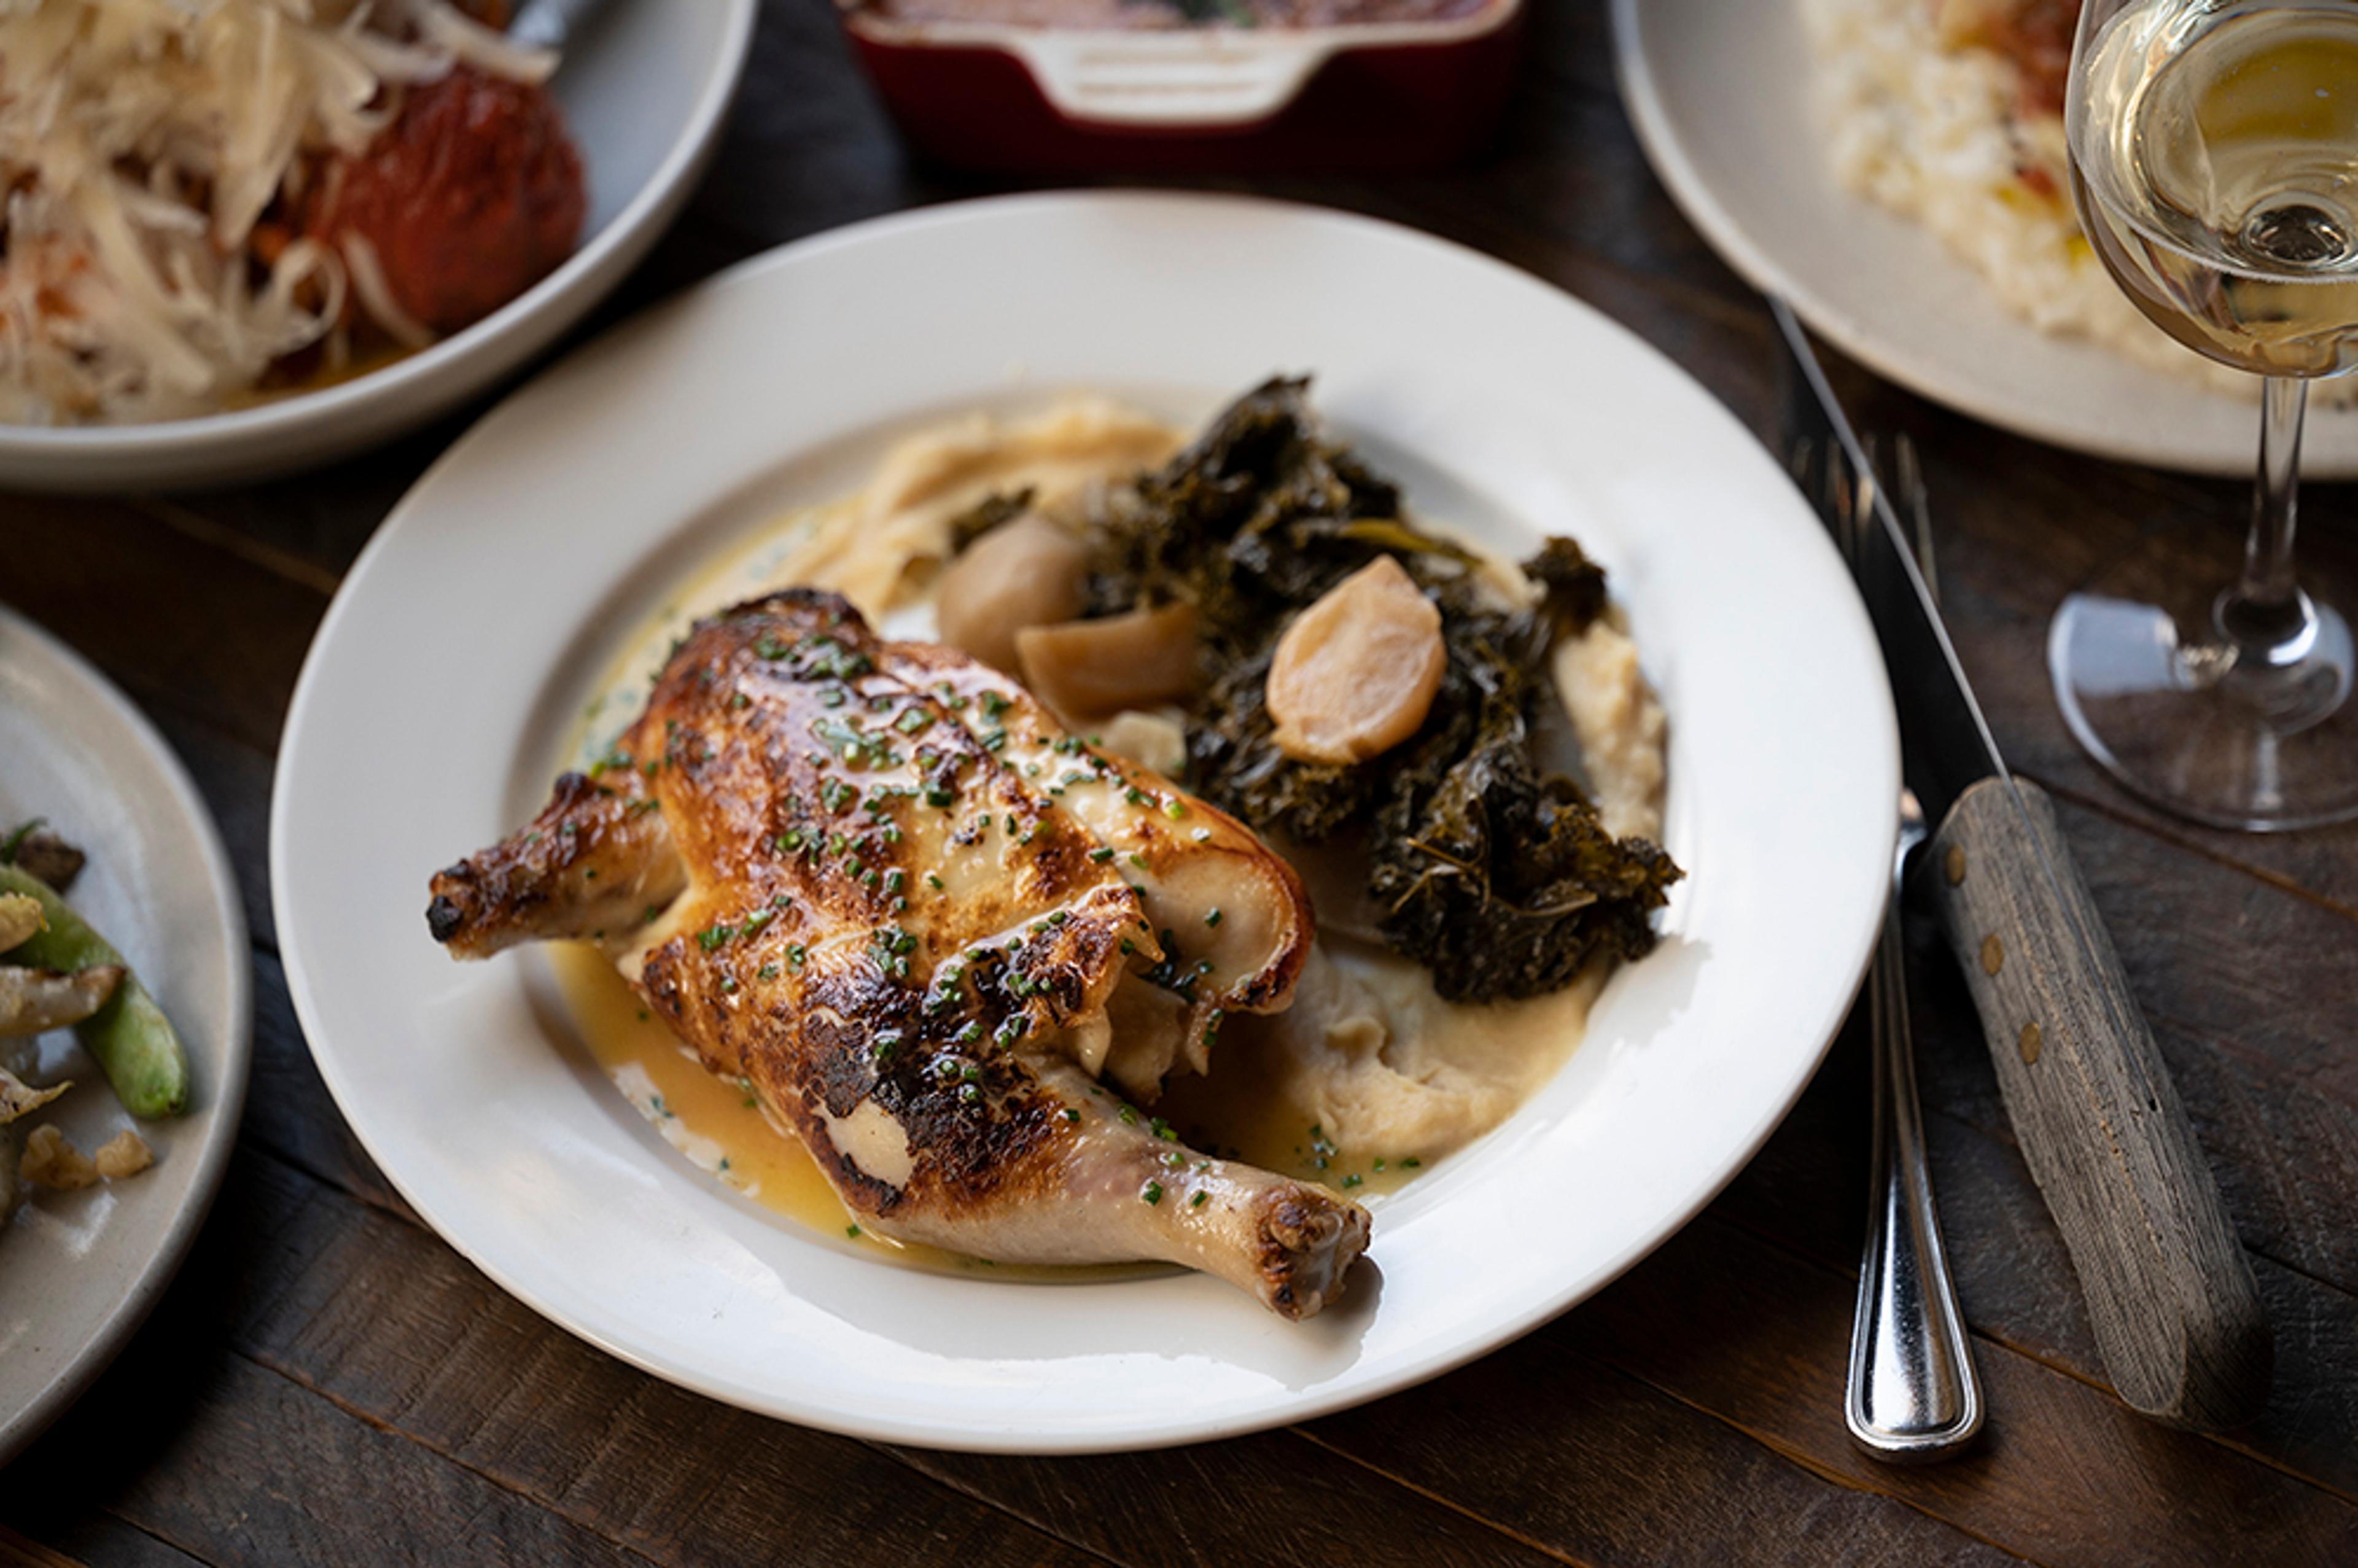 Half roasted chicken with turnips and braised greens